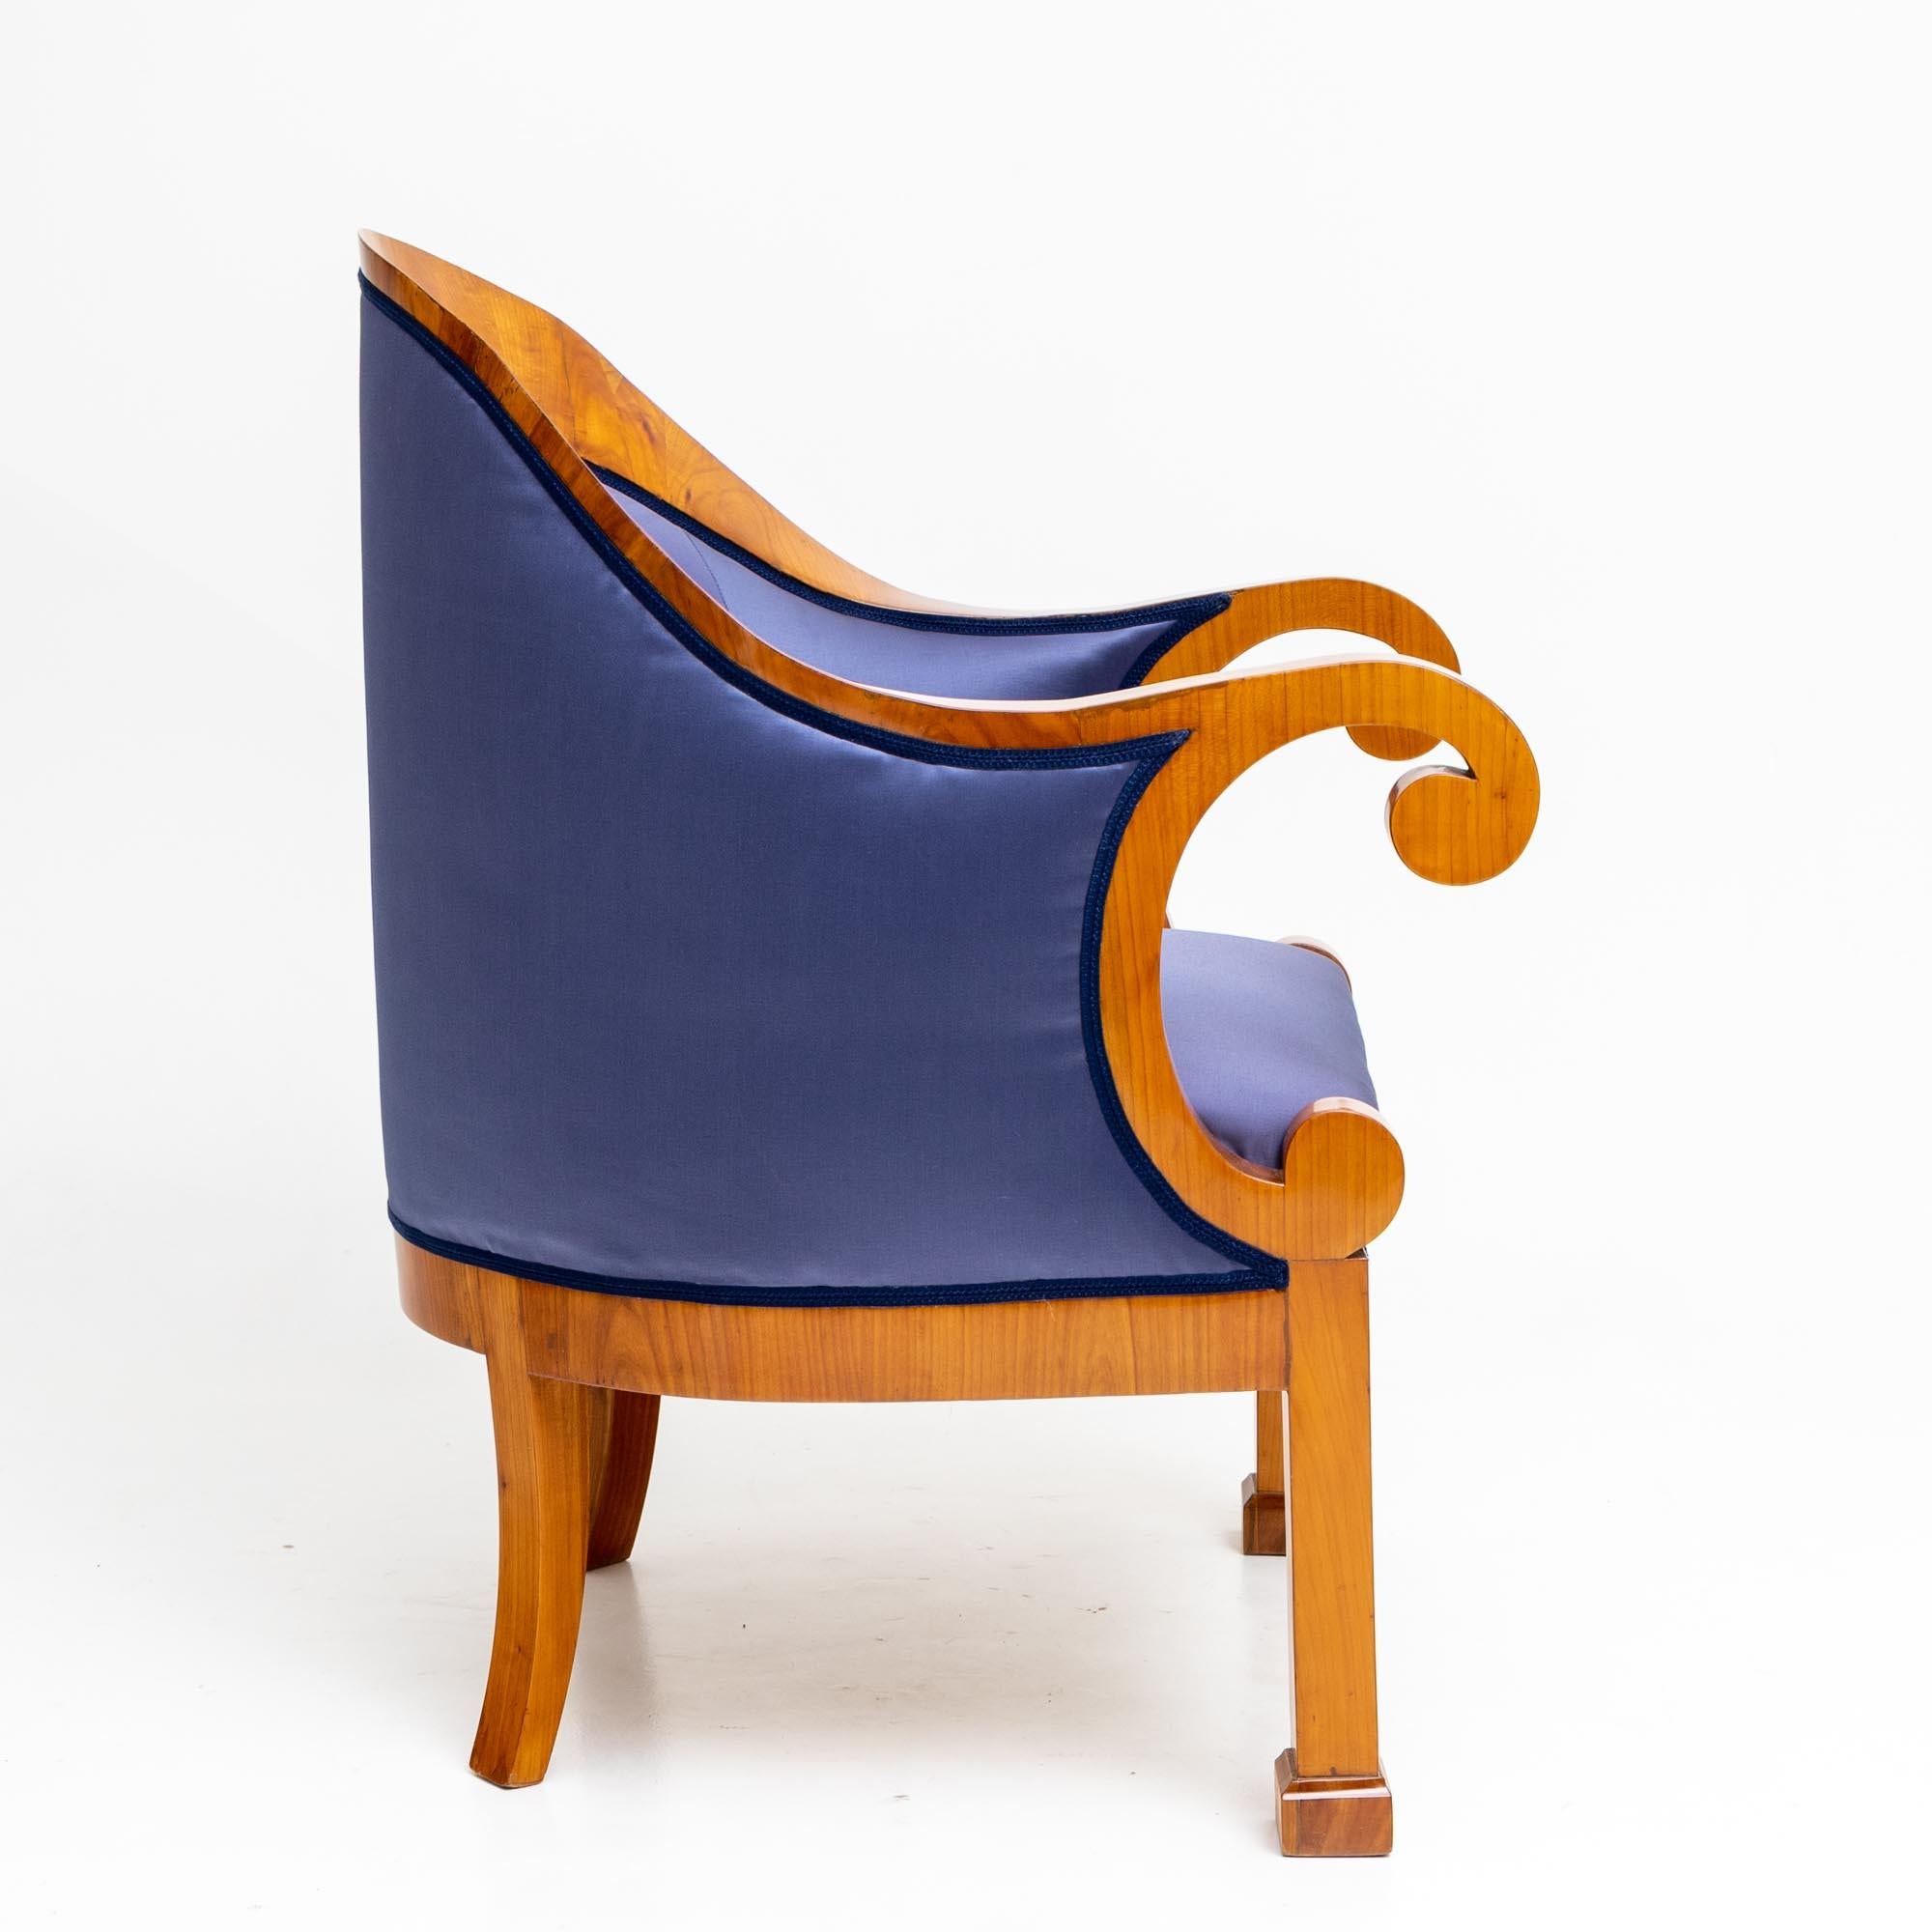 Biedermeier bergère in cherry veneer with elegant, c-shaped curved armrests and a centrally rising backrest. The armchair stands on socketed square feet at the front and flared sabre legs at the back. It is newly upholstered on all sides in a blue